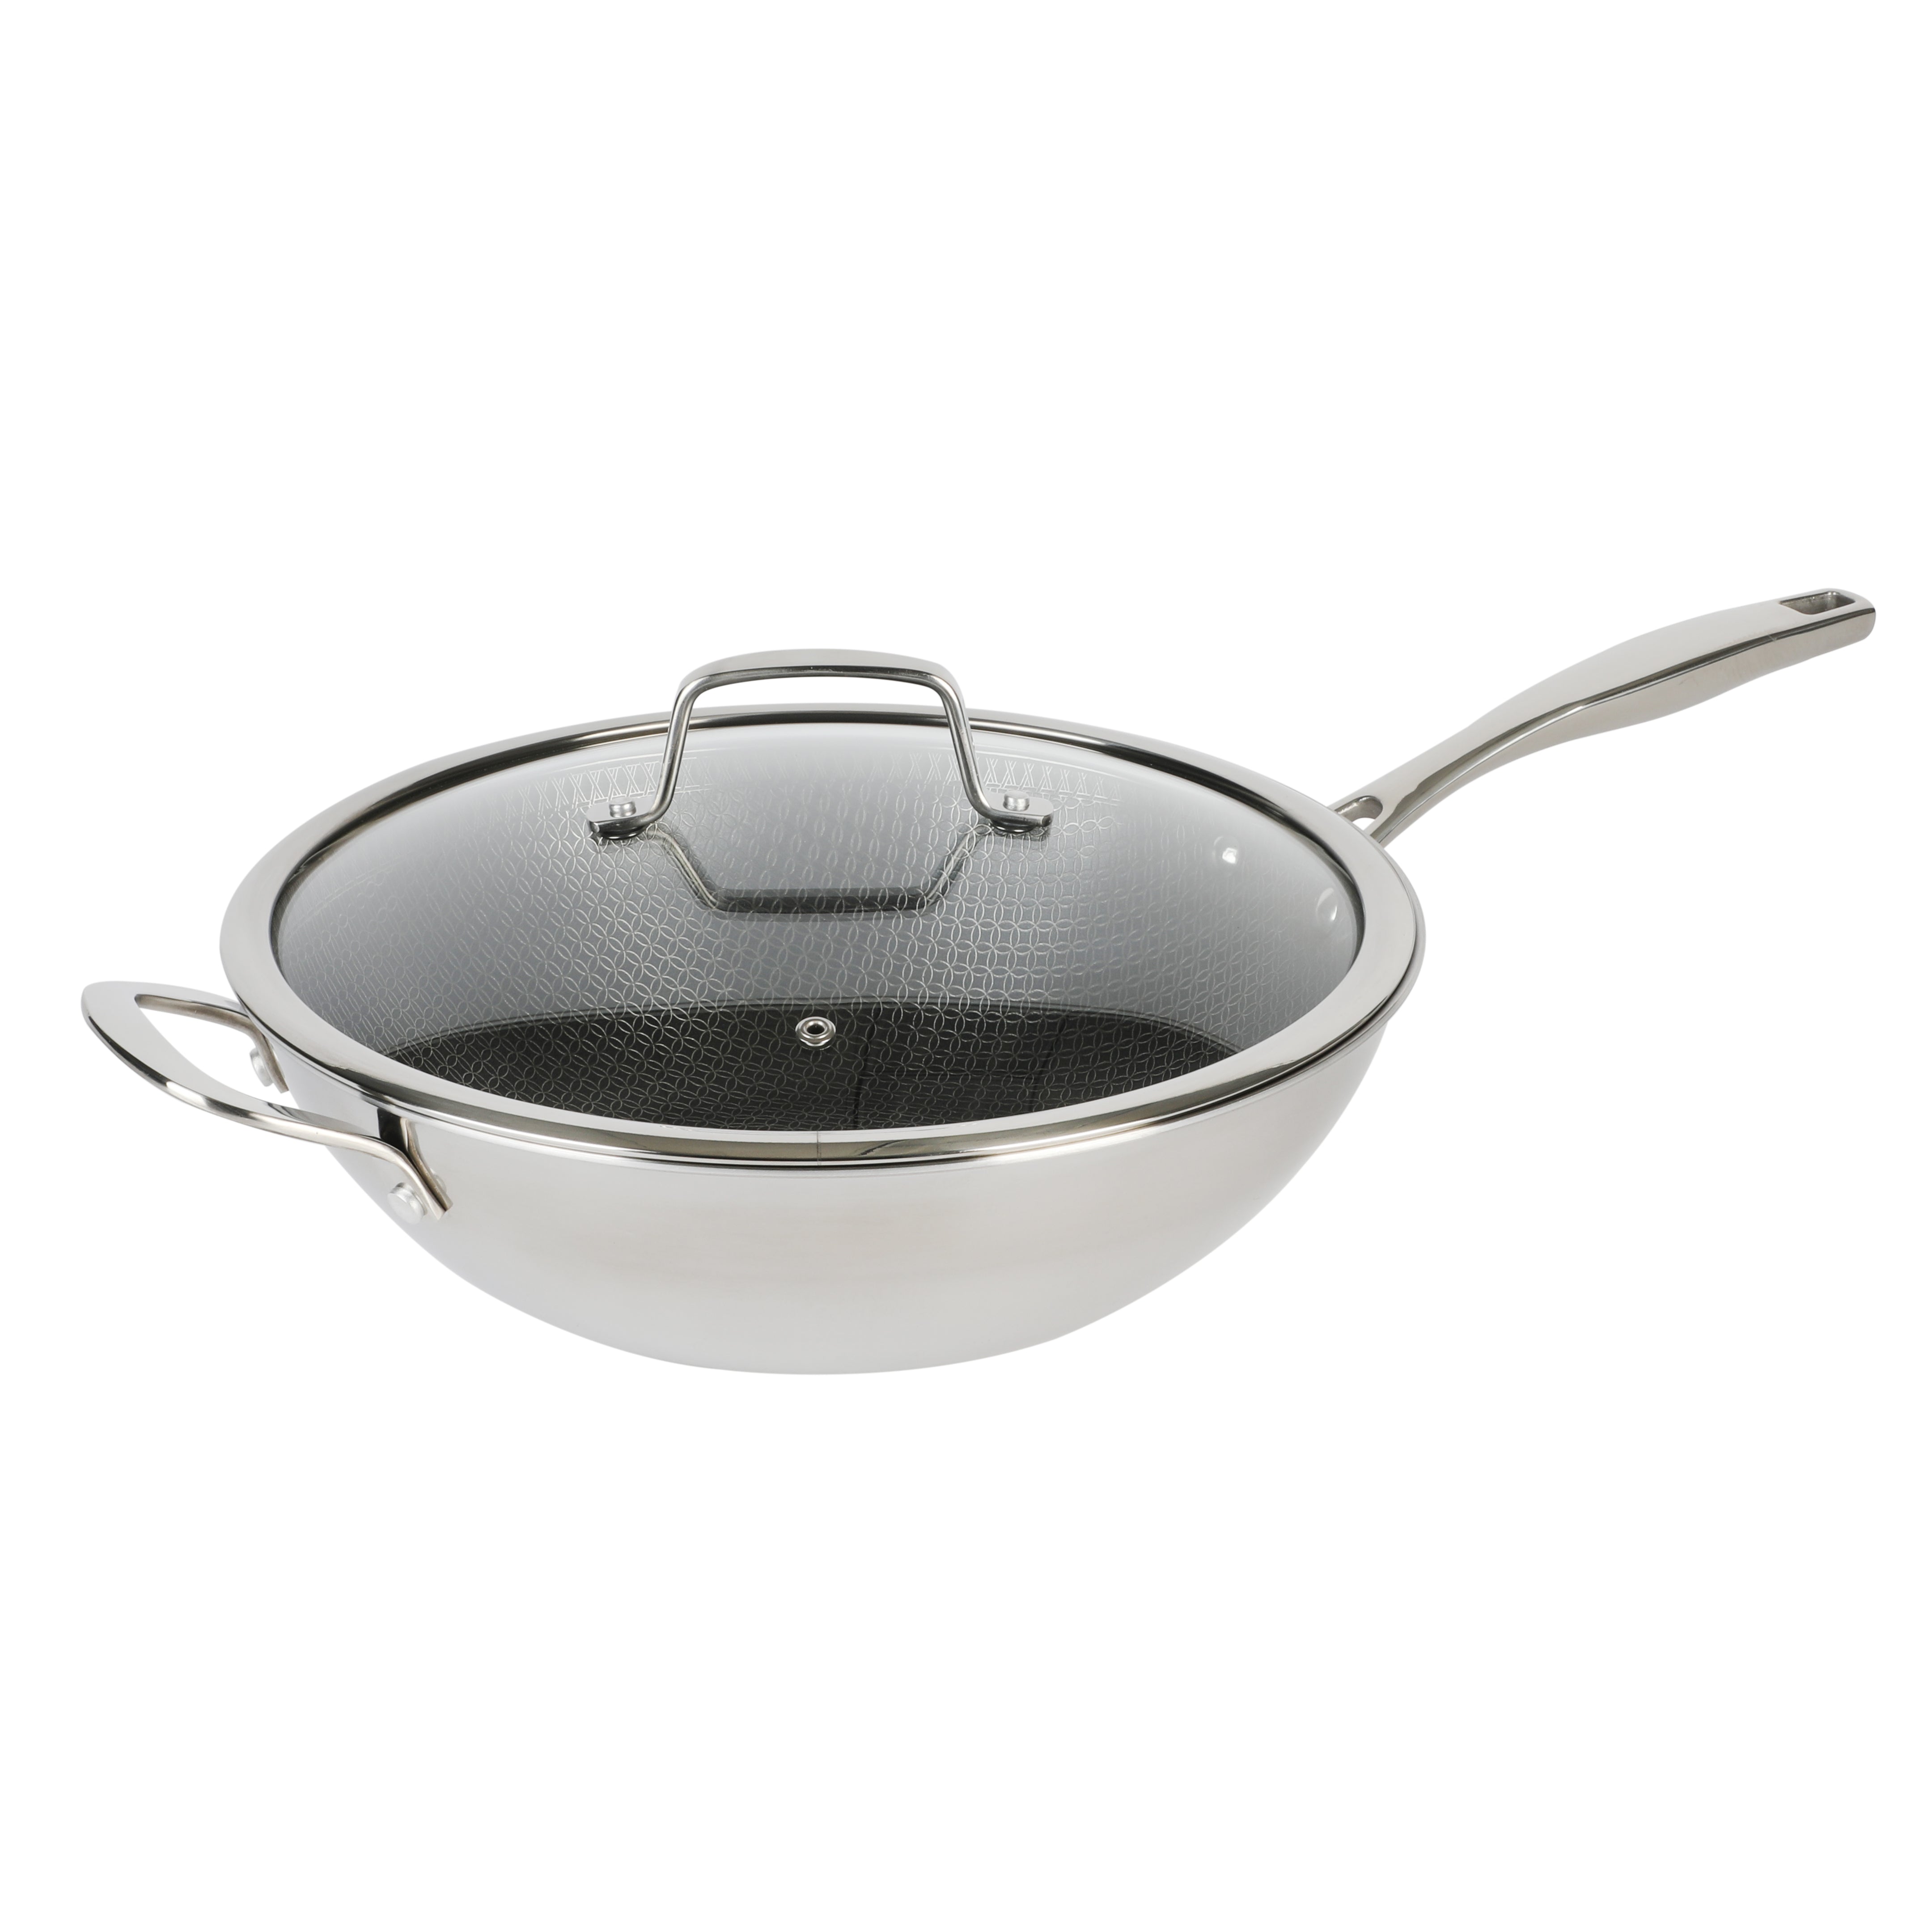 Blue Diamond Tri-Ply Stainless Steel Ceramic Nonstick 11-in. Wok Pan with Lid, 11